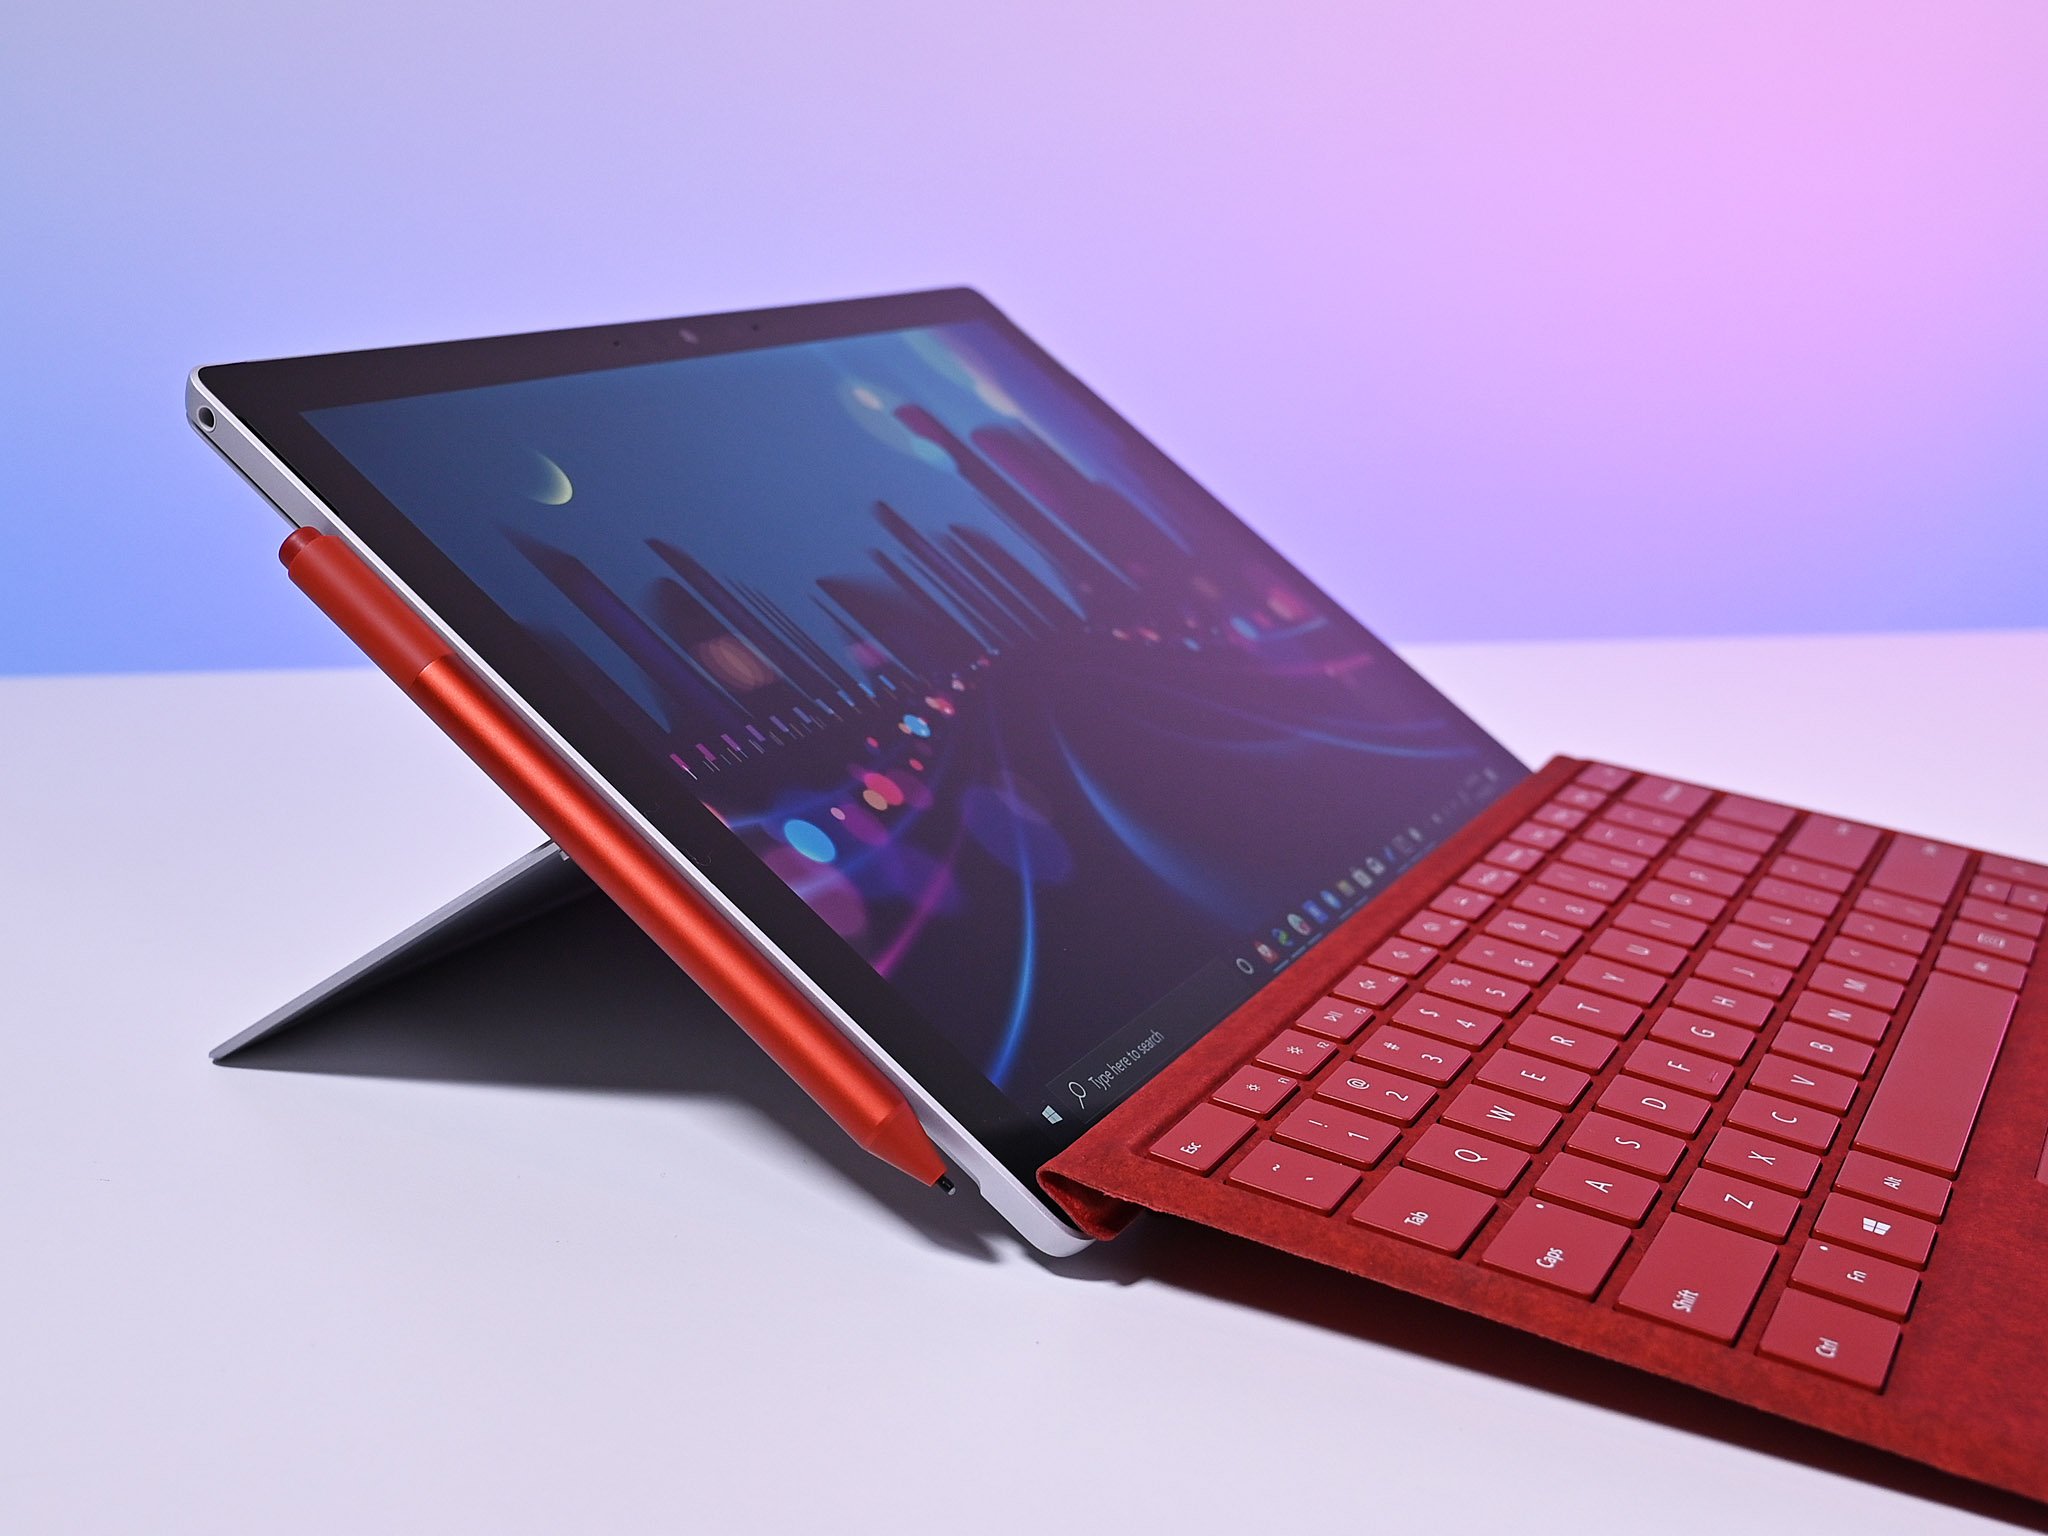 Surface Pro 7 with Red keyboard and Surface Pen